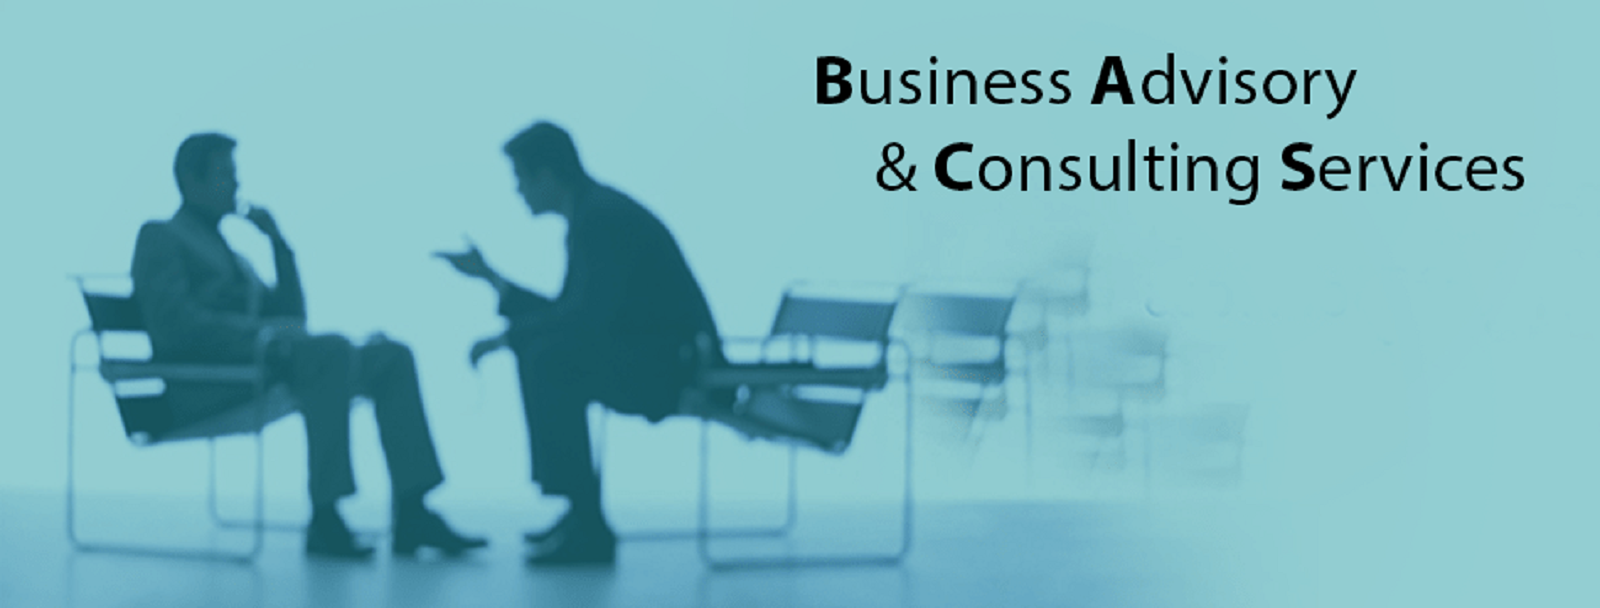 Business Advisory And Consulting Firms In Mumbai